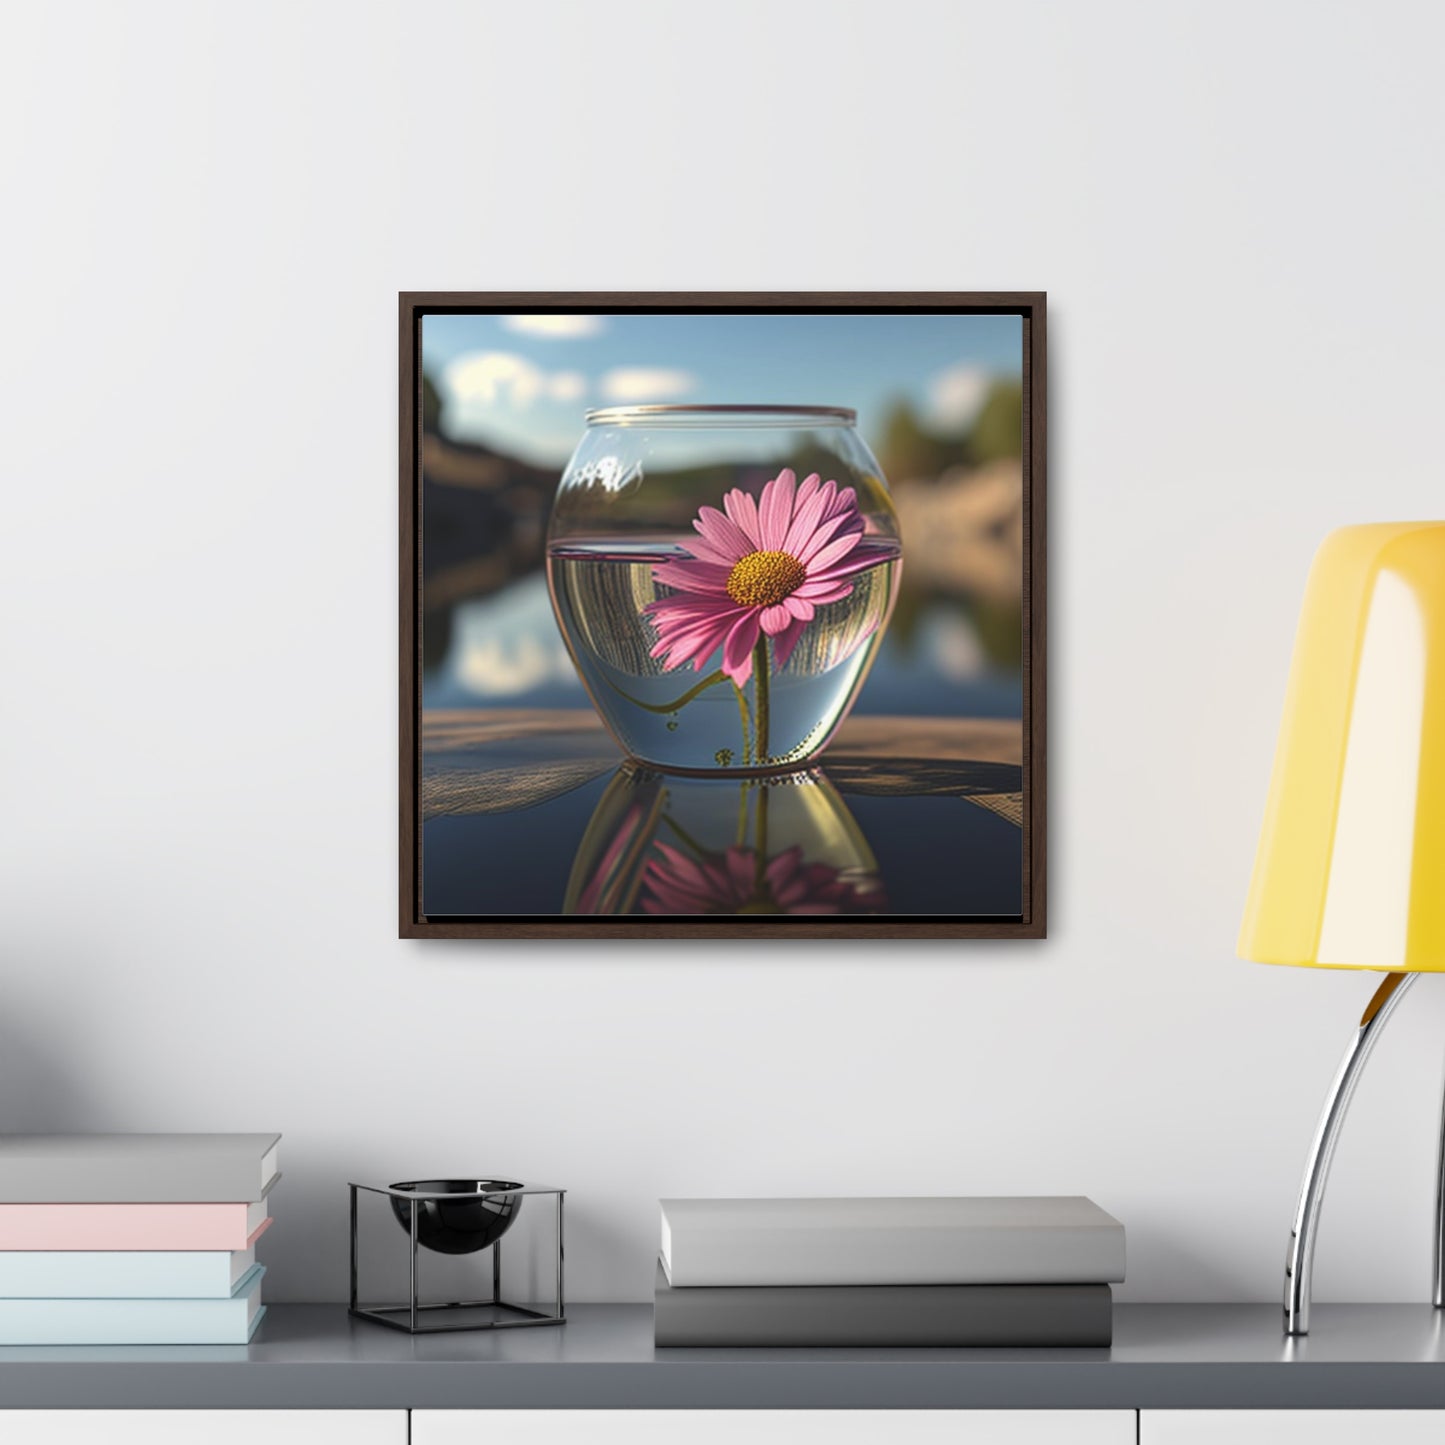 Gallery Canvas Wraps, Square Frame Pink Daisy 3